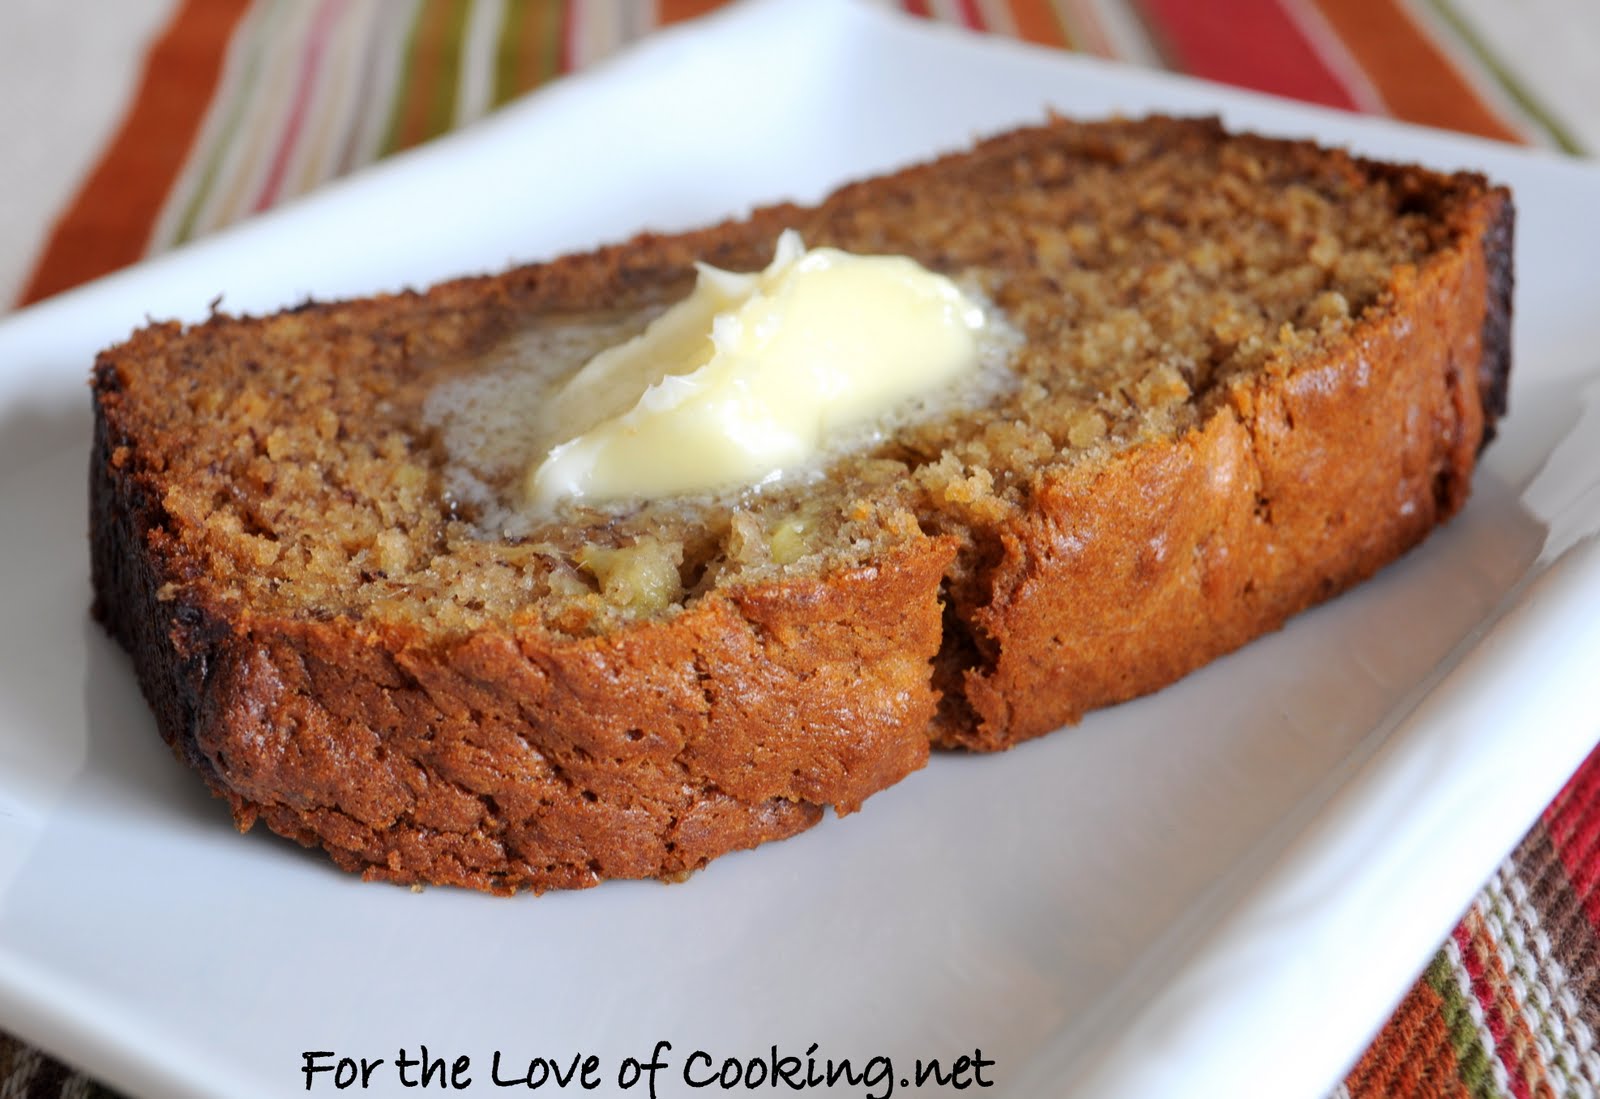 For the Love of Cooking: Banana Banana Bread